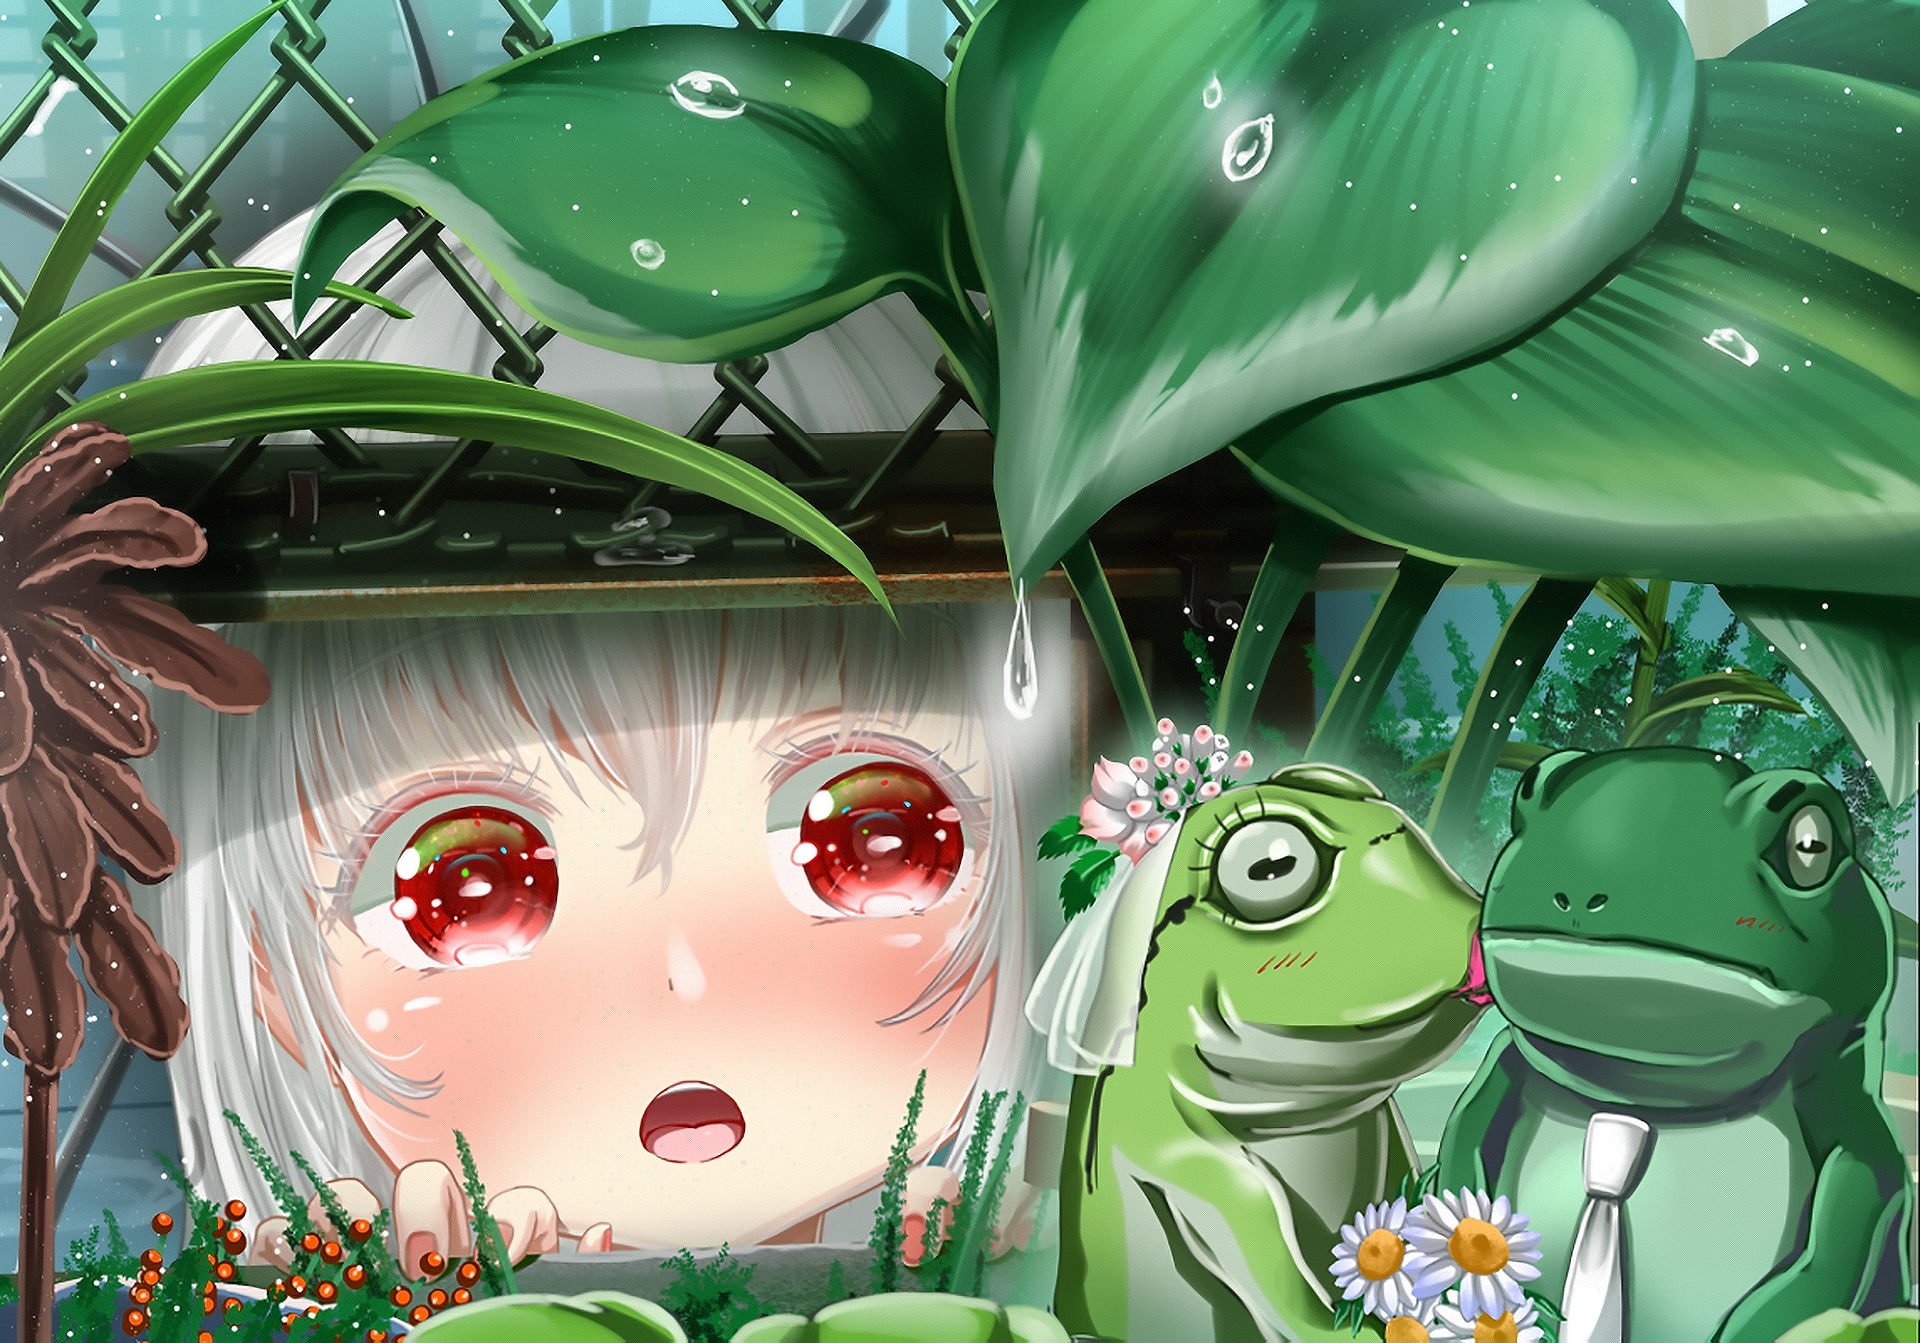 Anime 1920x1343 anime digital art anime girls barbed wire fence rain plants frog bridal veil daisies kissing white hair short hair red eyes blushing makeup water drops painted nails highlights